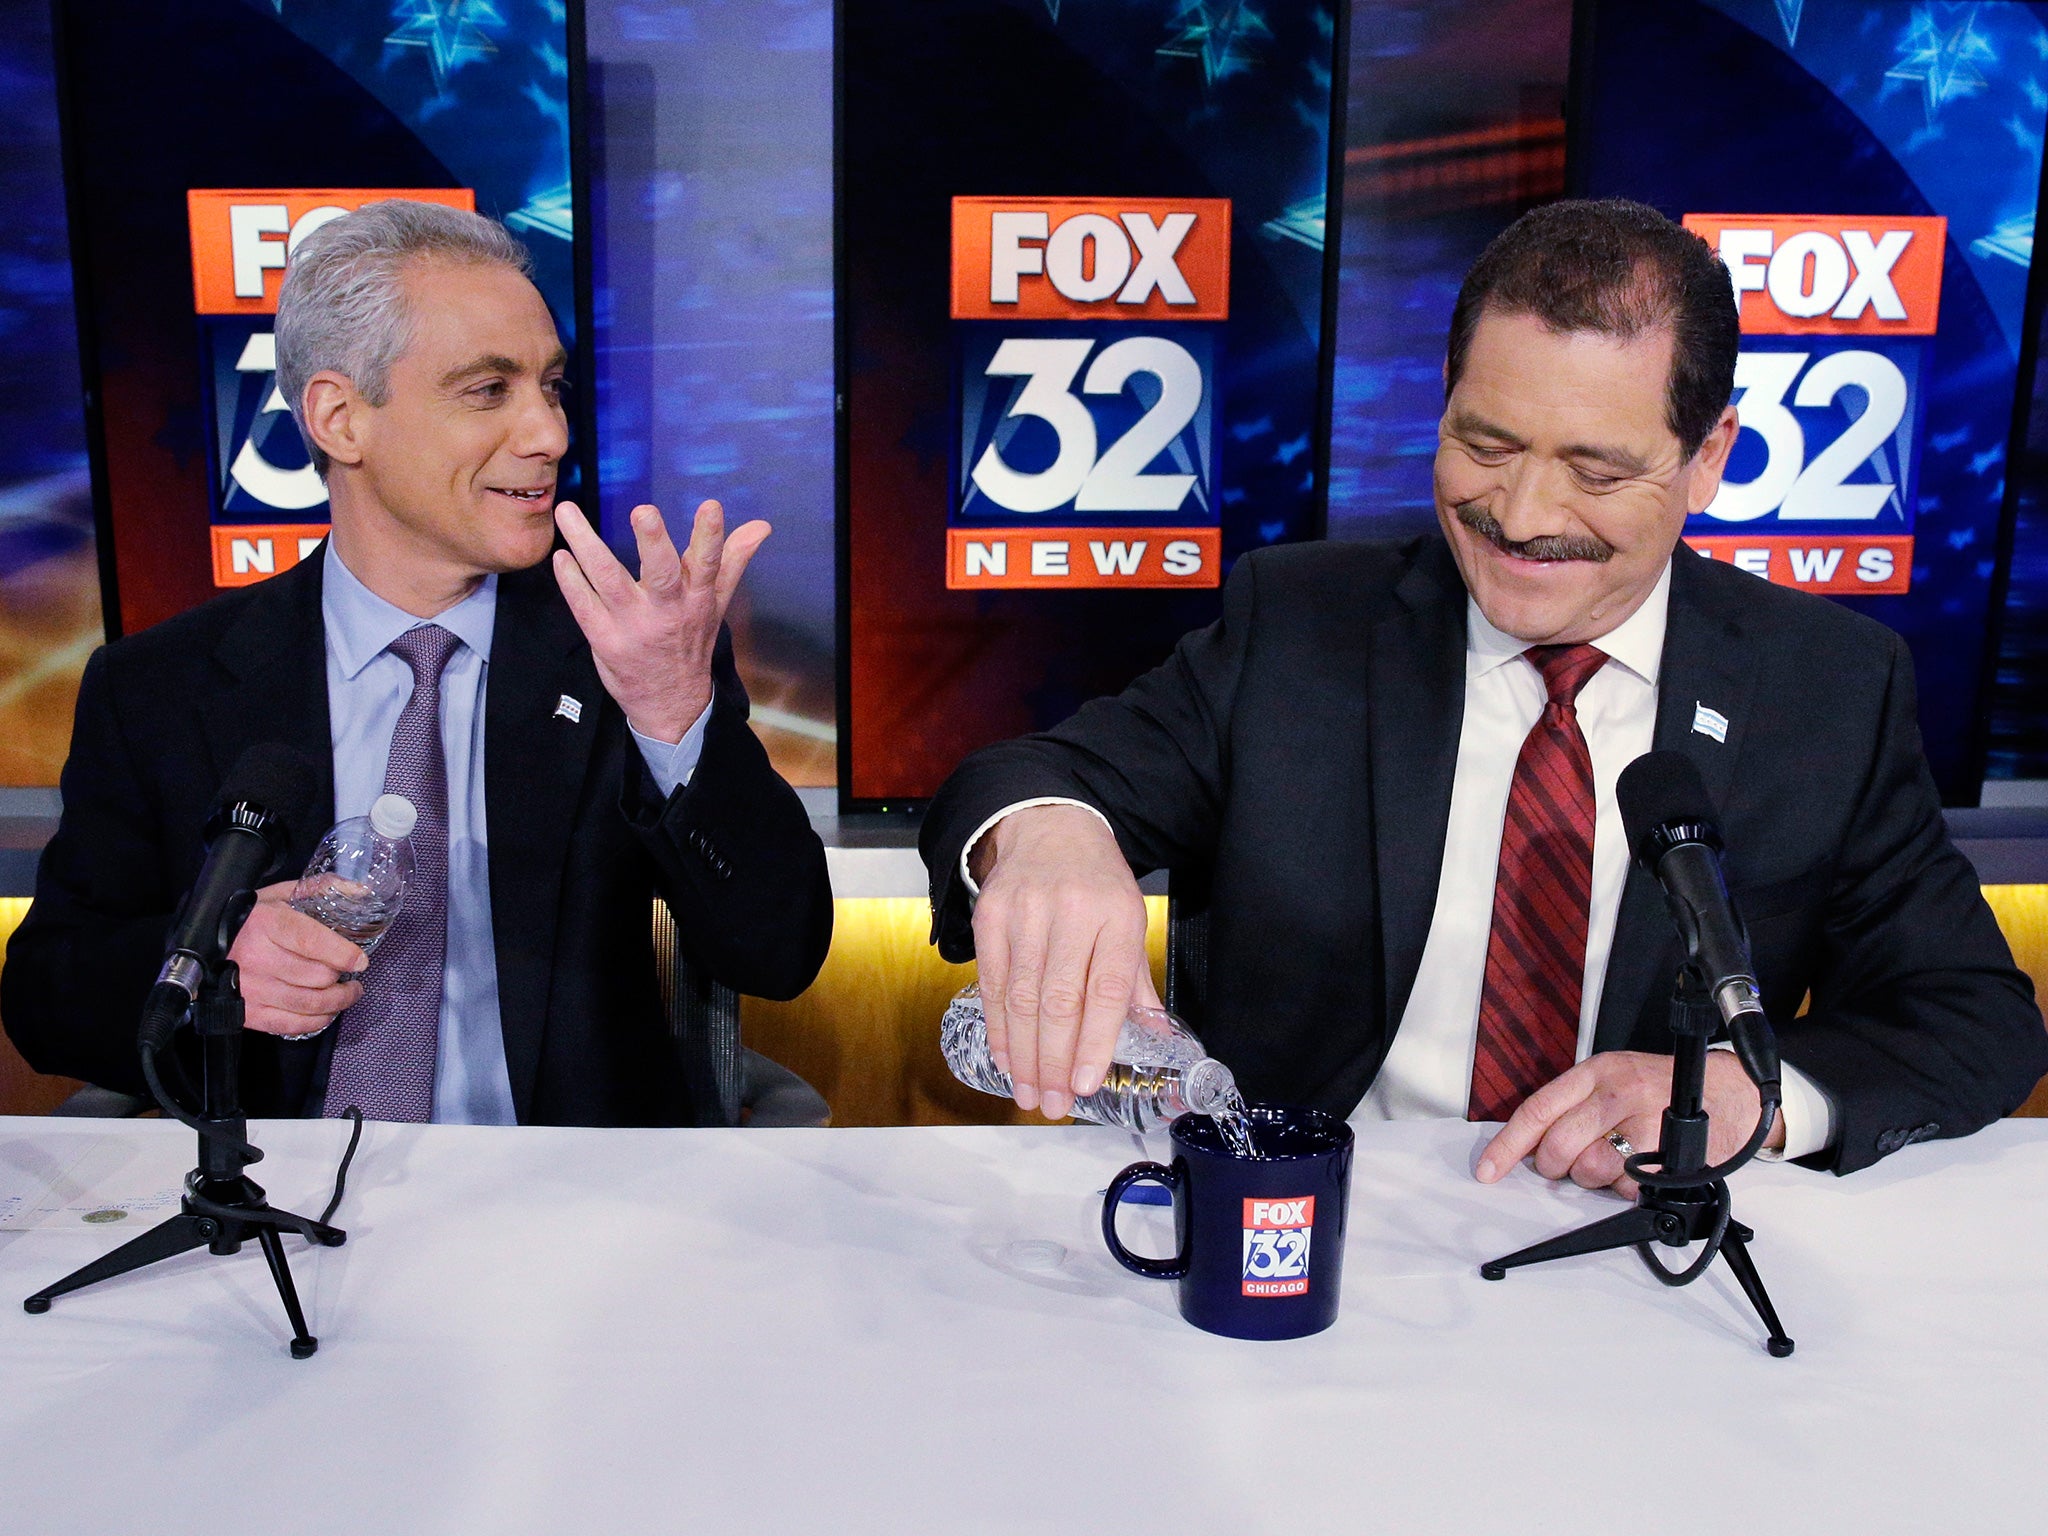 Chicago Mayor Rahm Emanuel (left) is being challenged by Mexican candiate Jesus Garcia